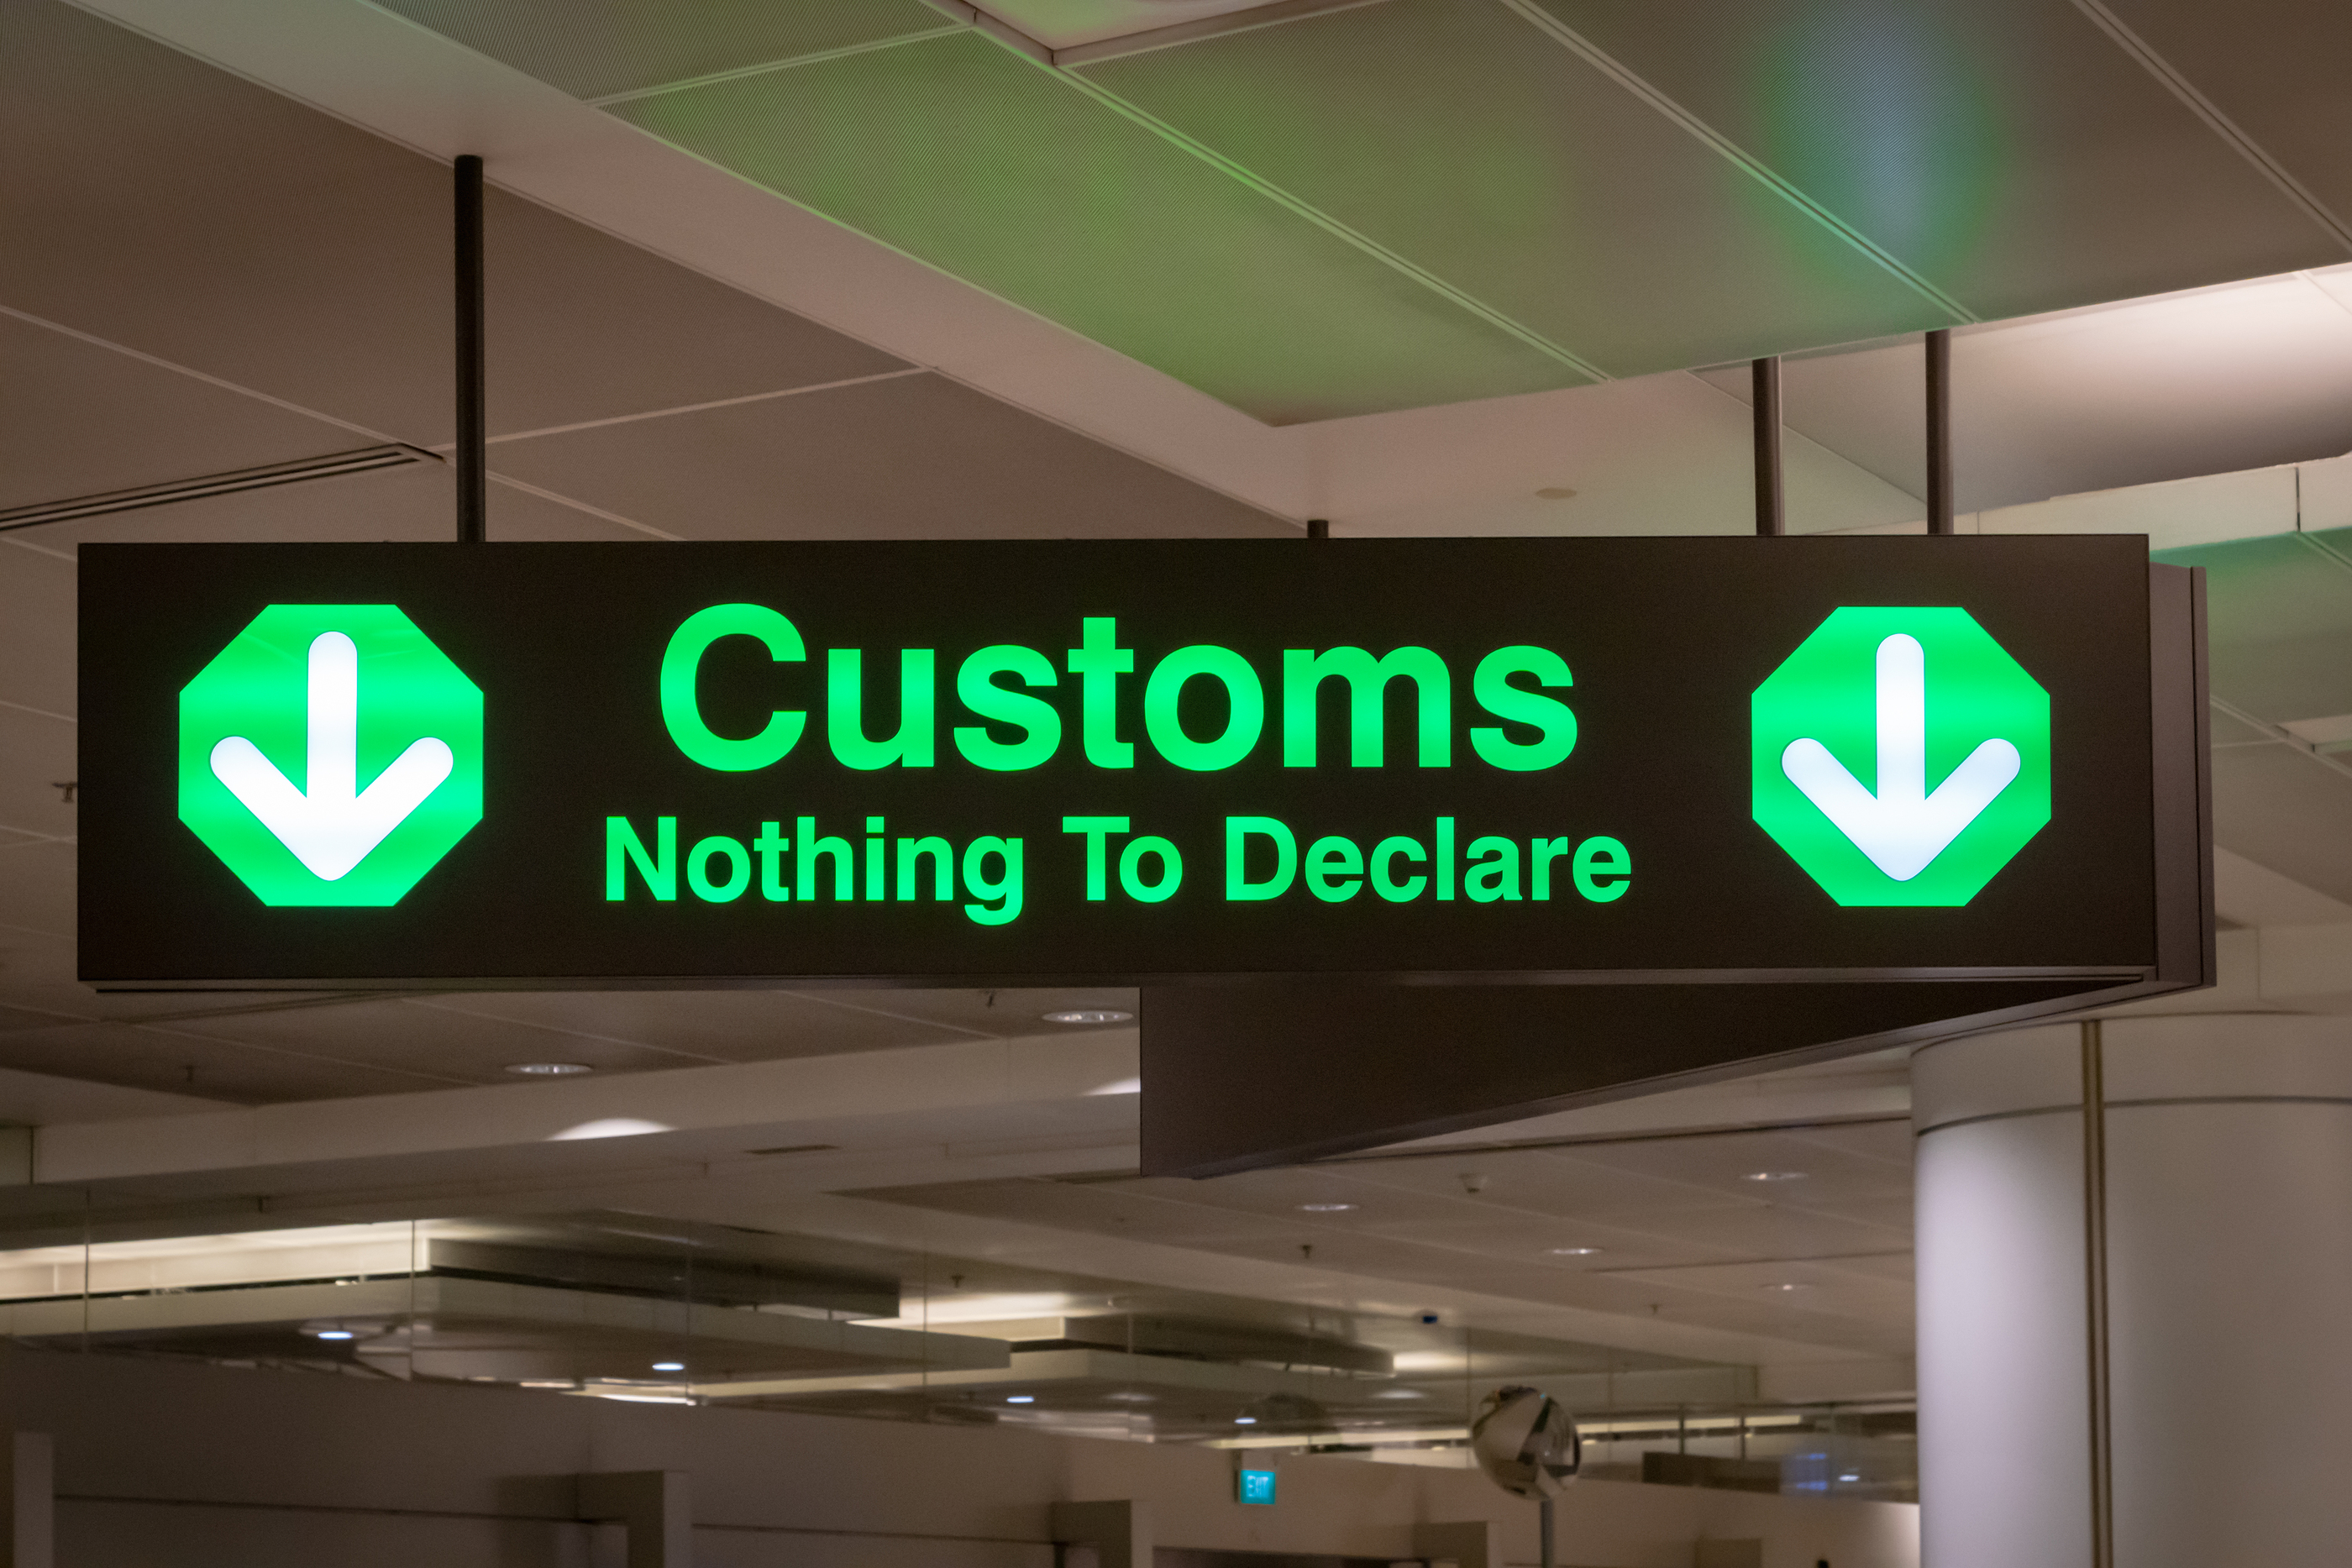 a sign with green text and arrows